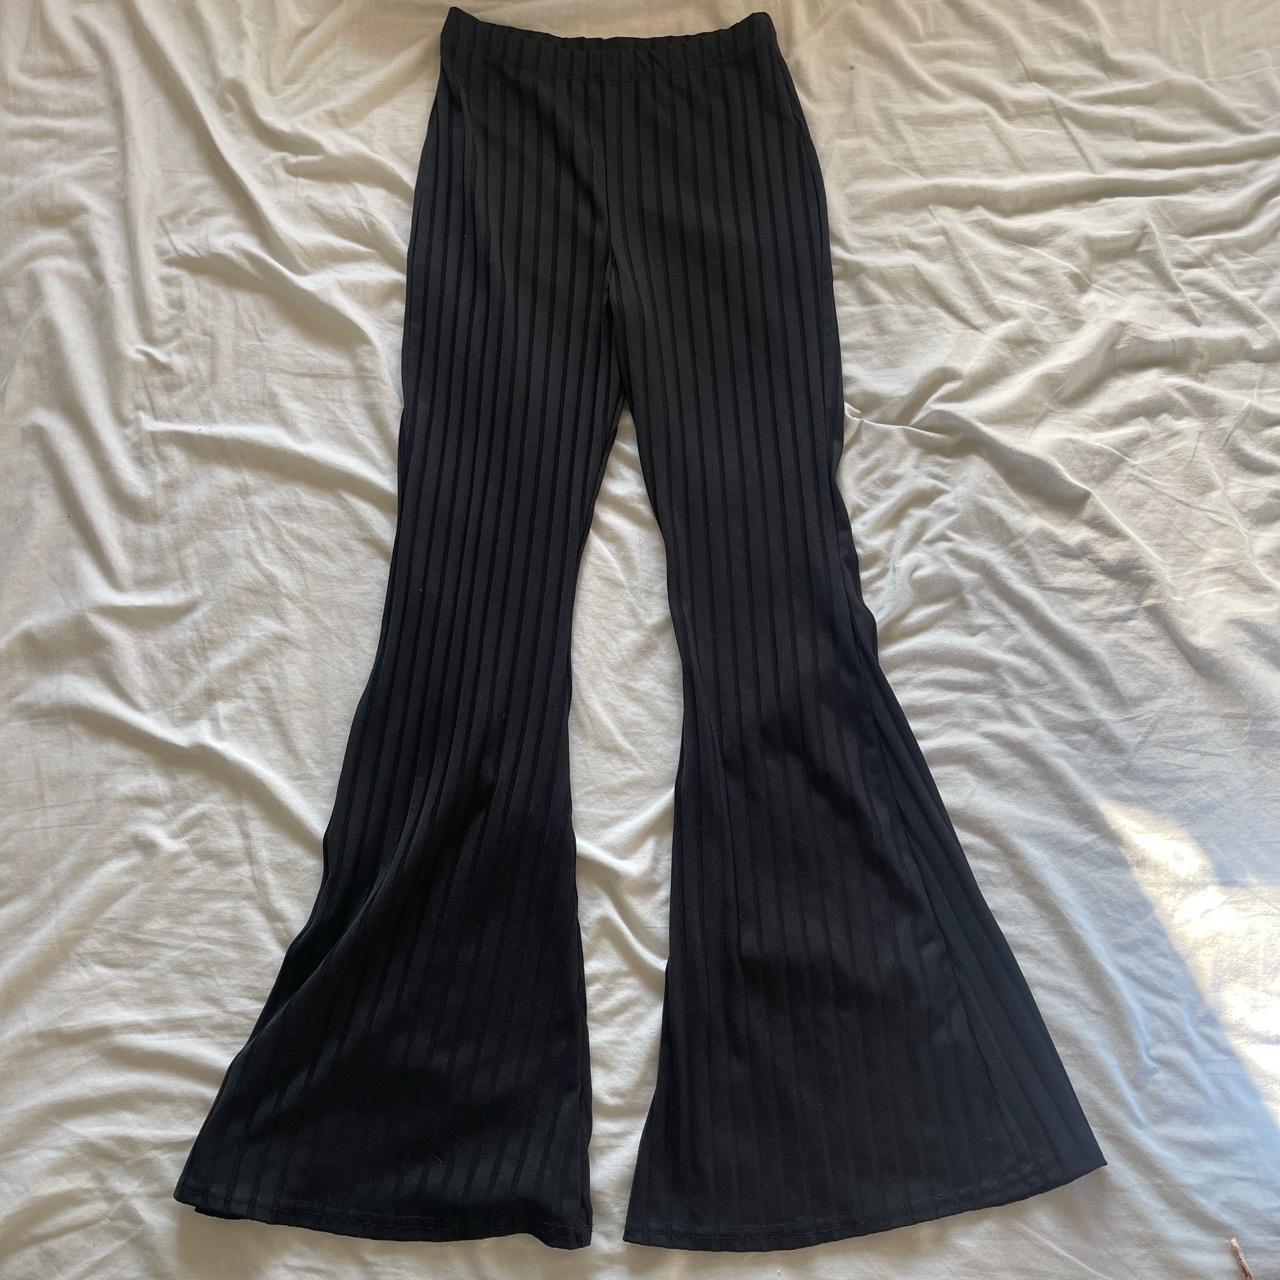 PLT flares Worn a few times but perfect condition - Depop